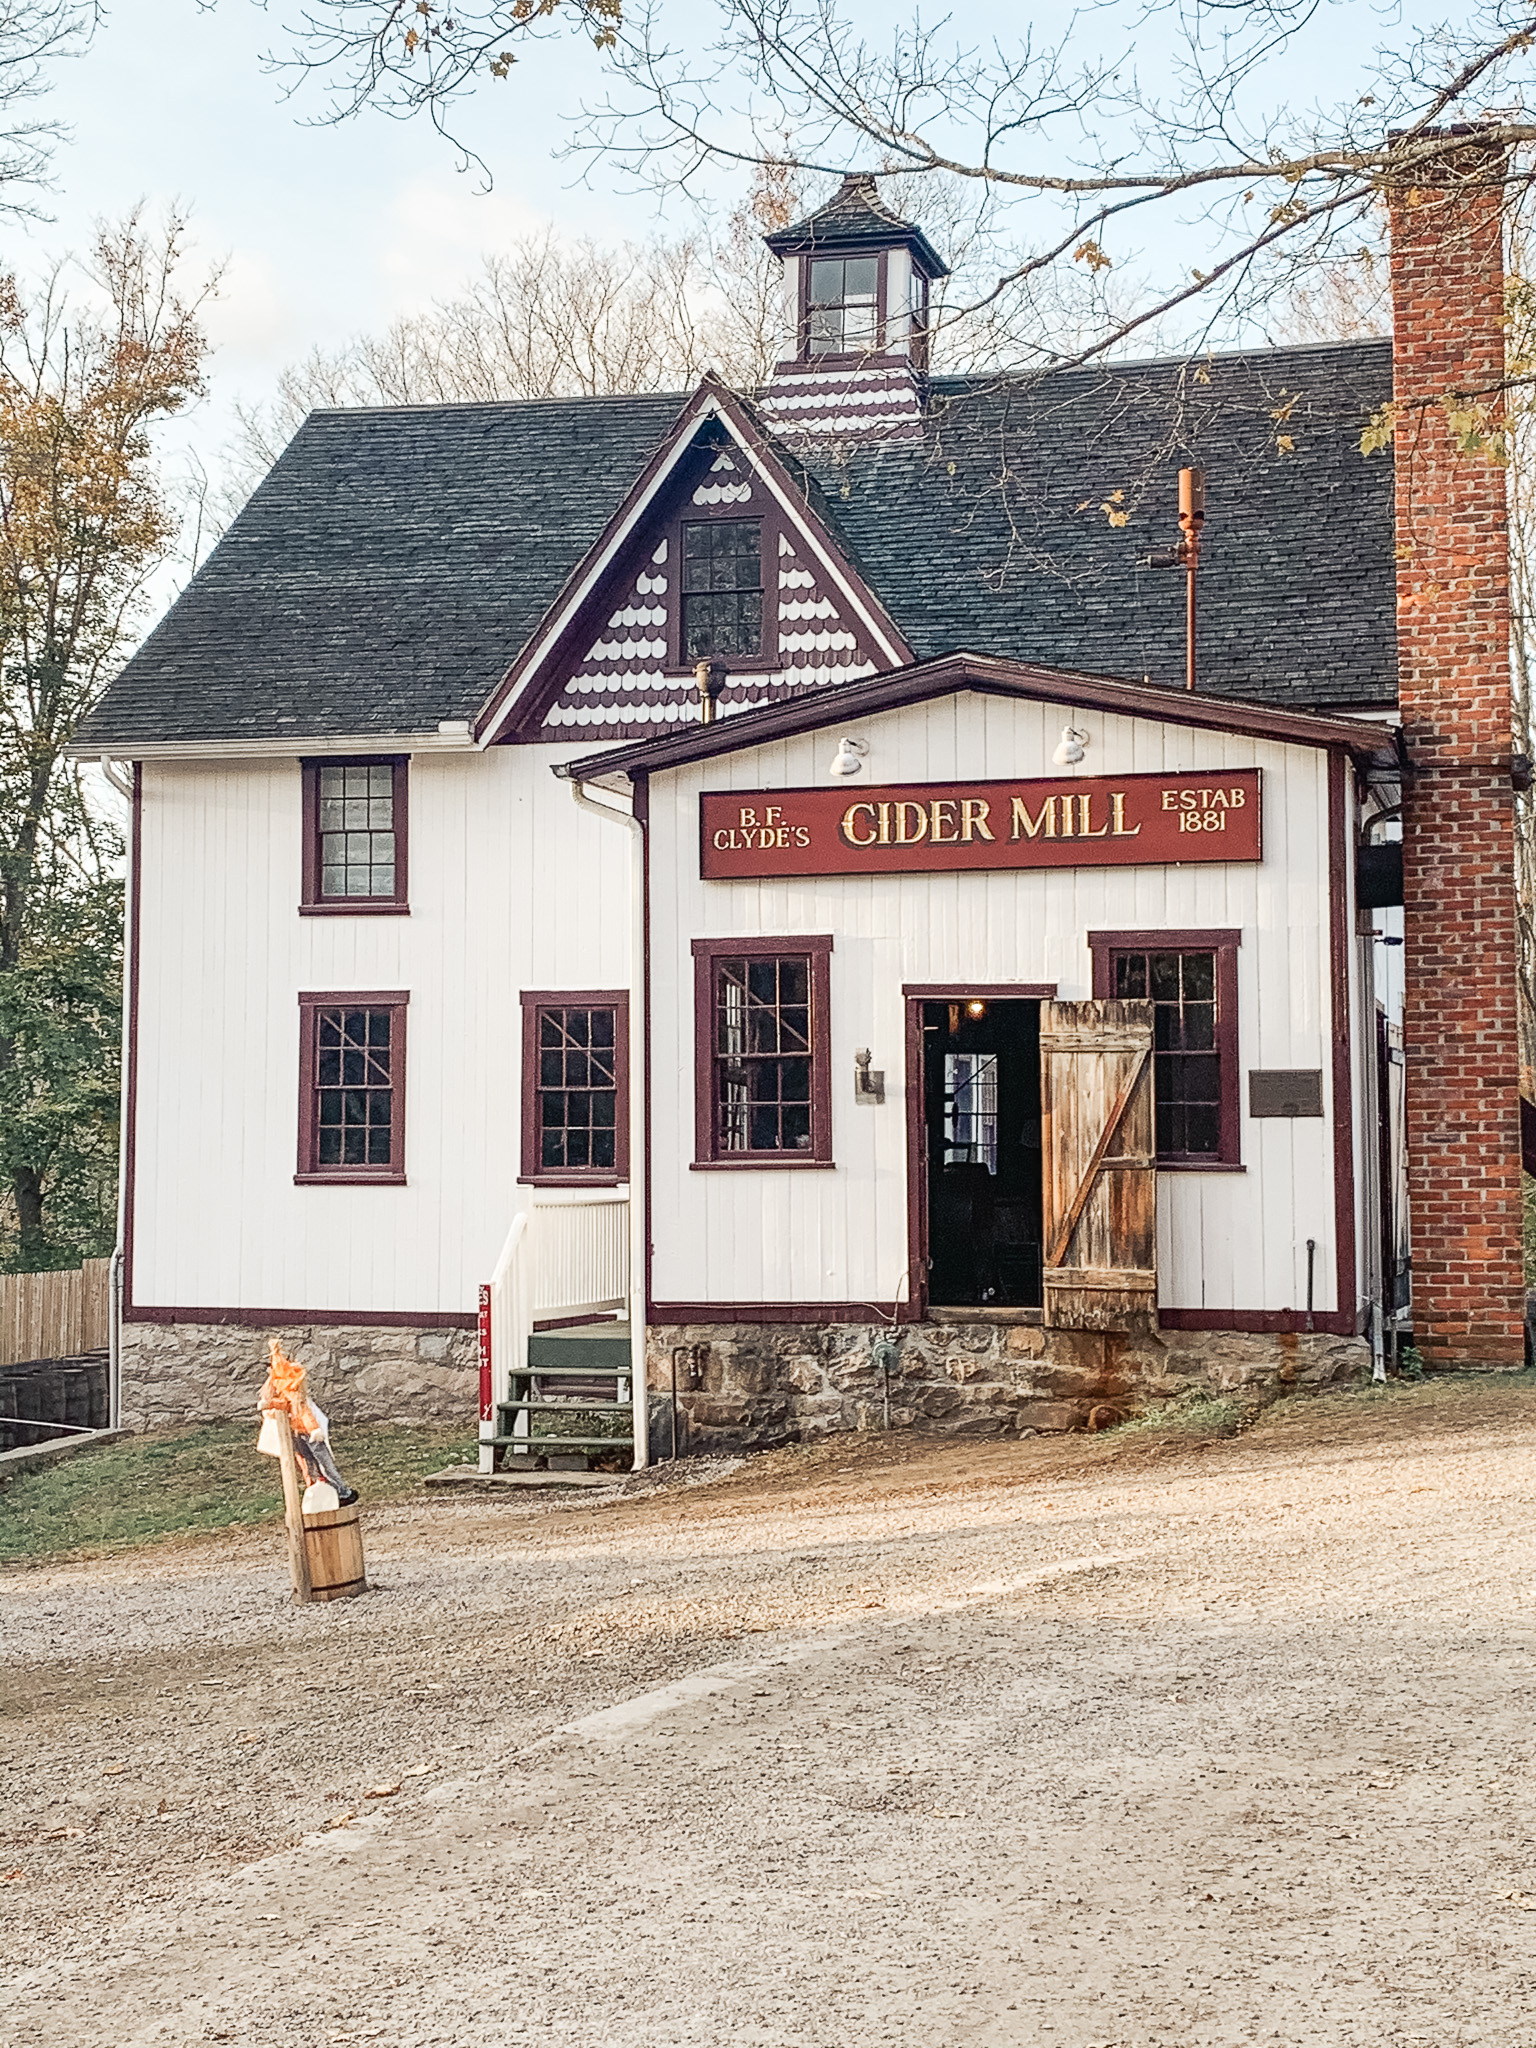 BF Clyde's Cider Mill is definitely worth visiting in Mystic CT